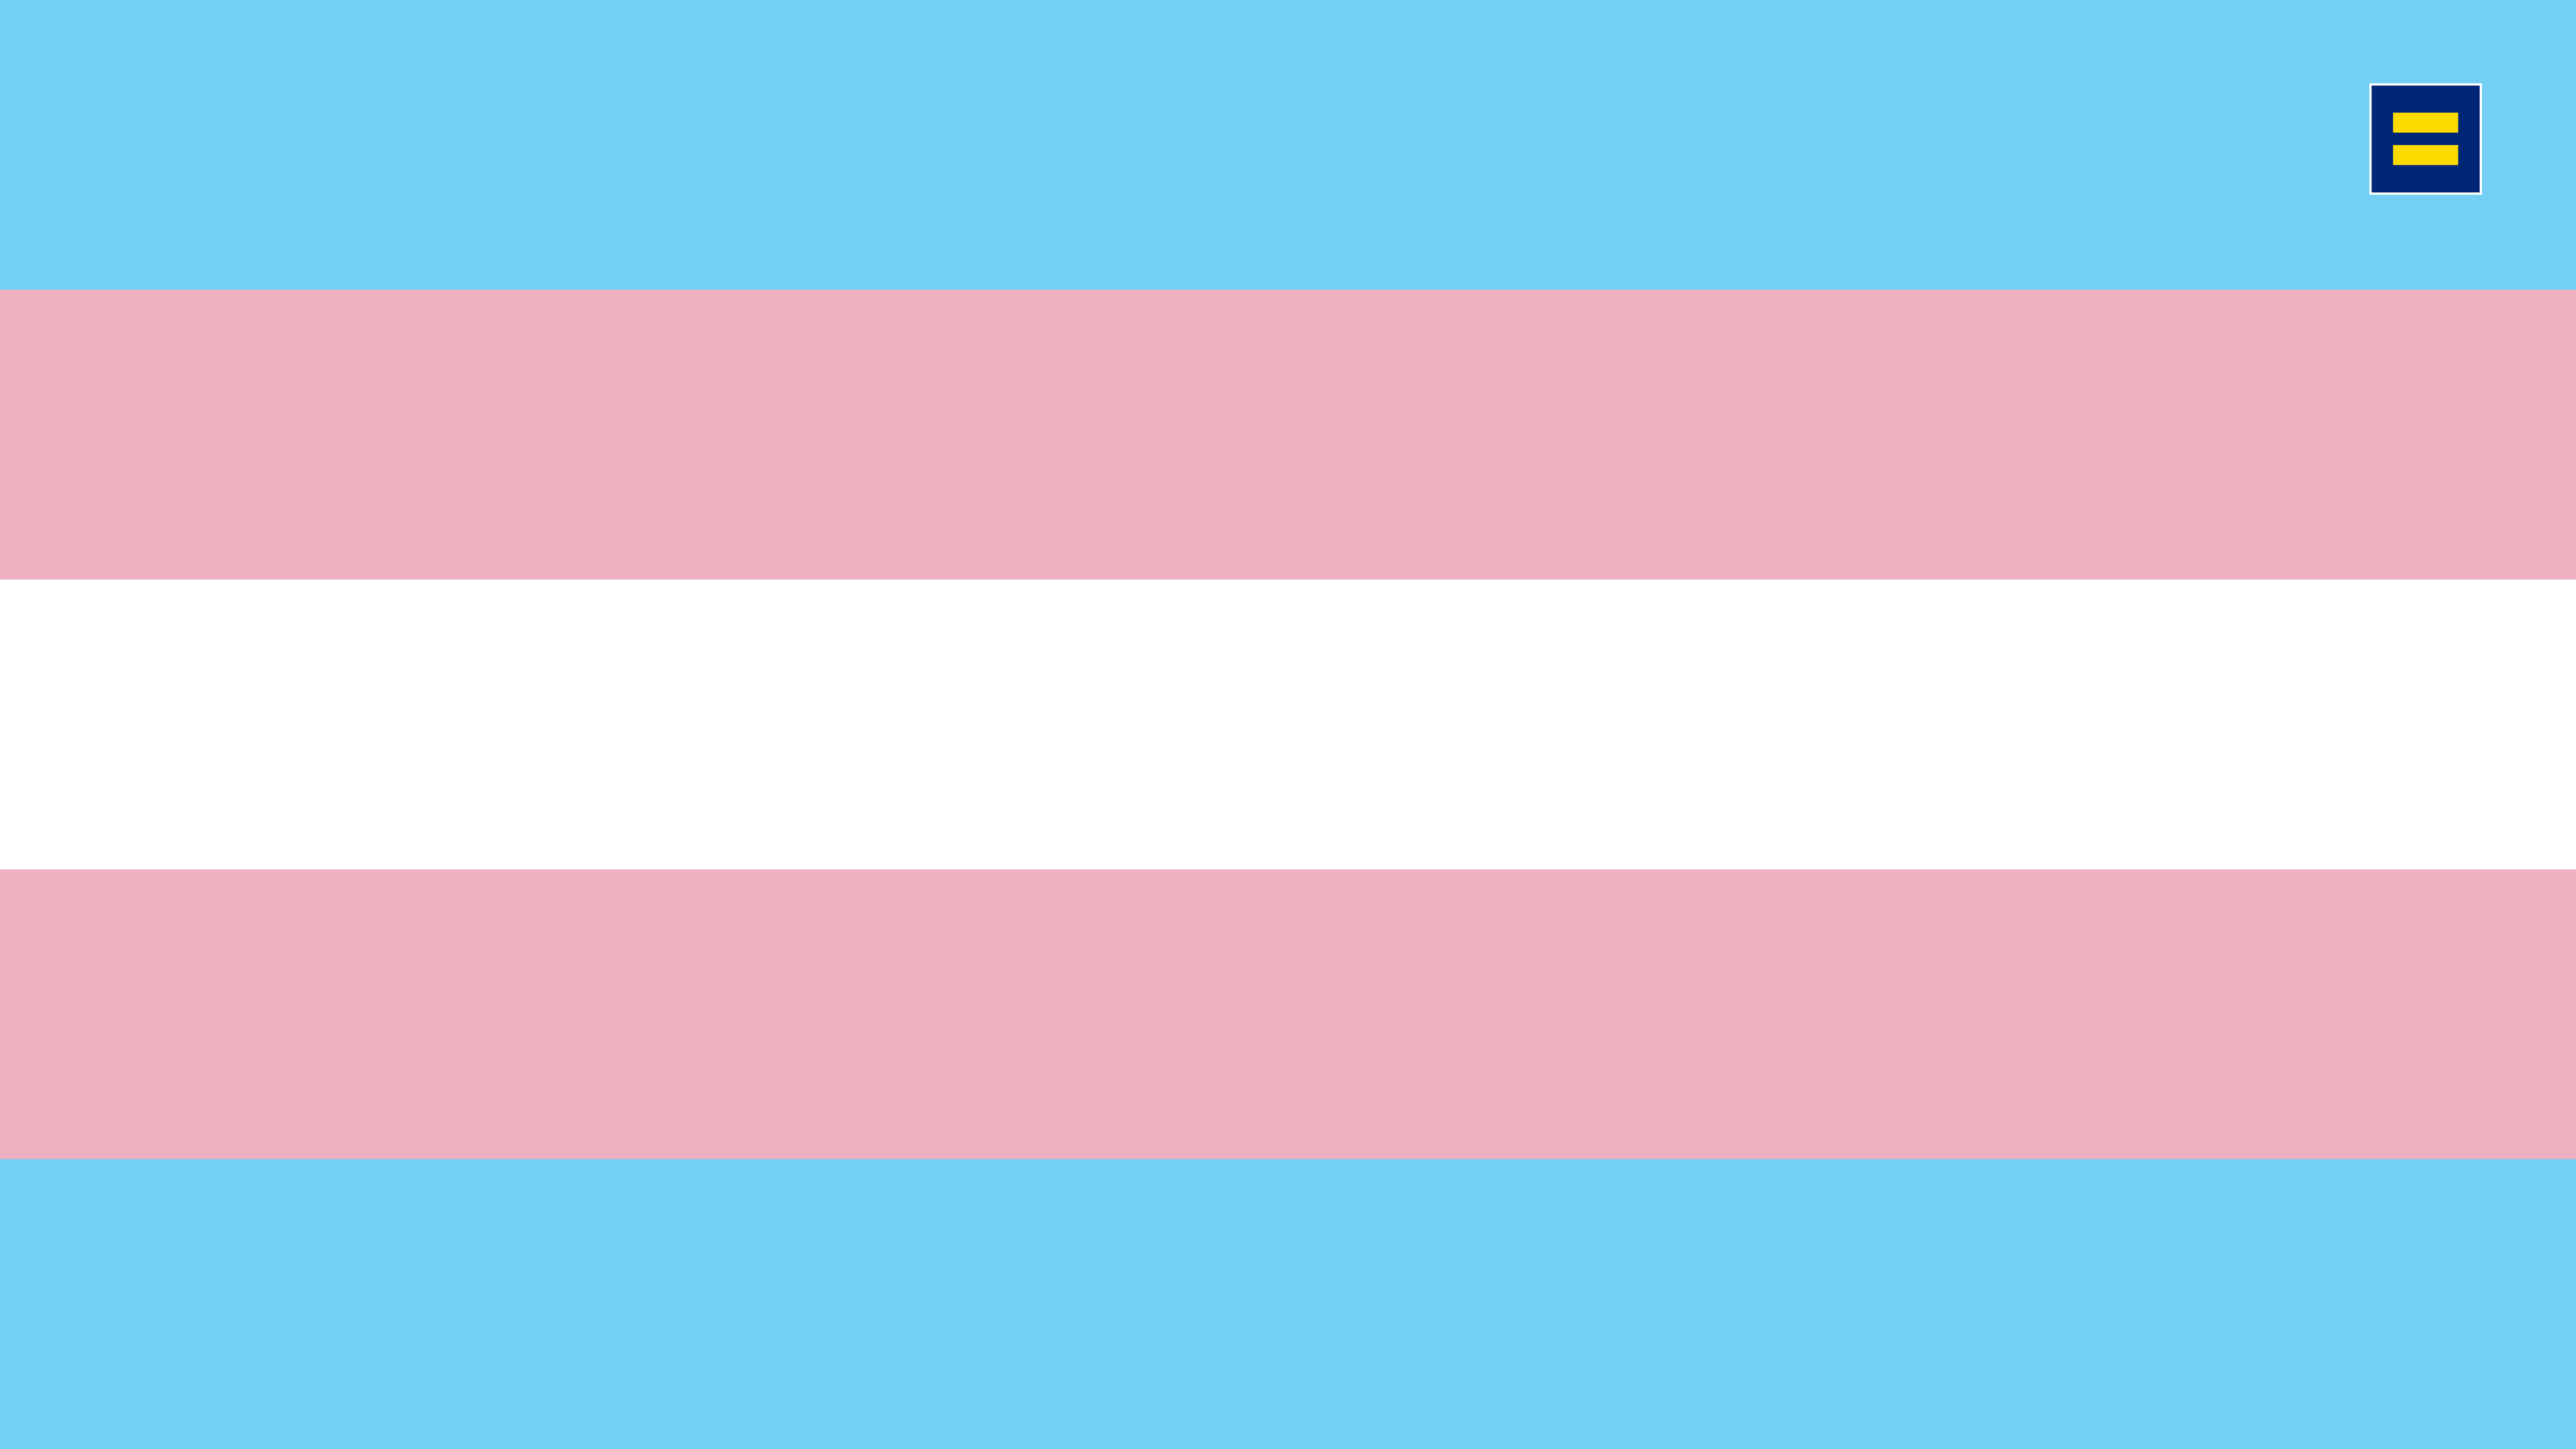 Transgender Flag - Show your pride and promote LGBTQ rights